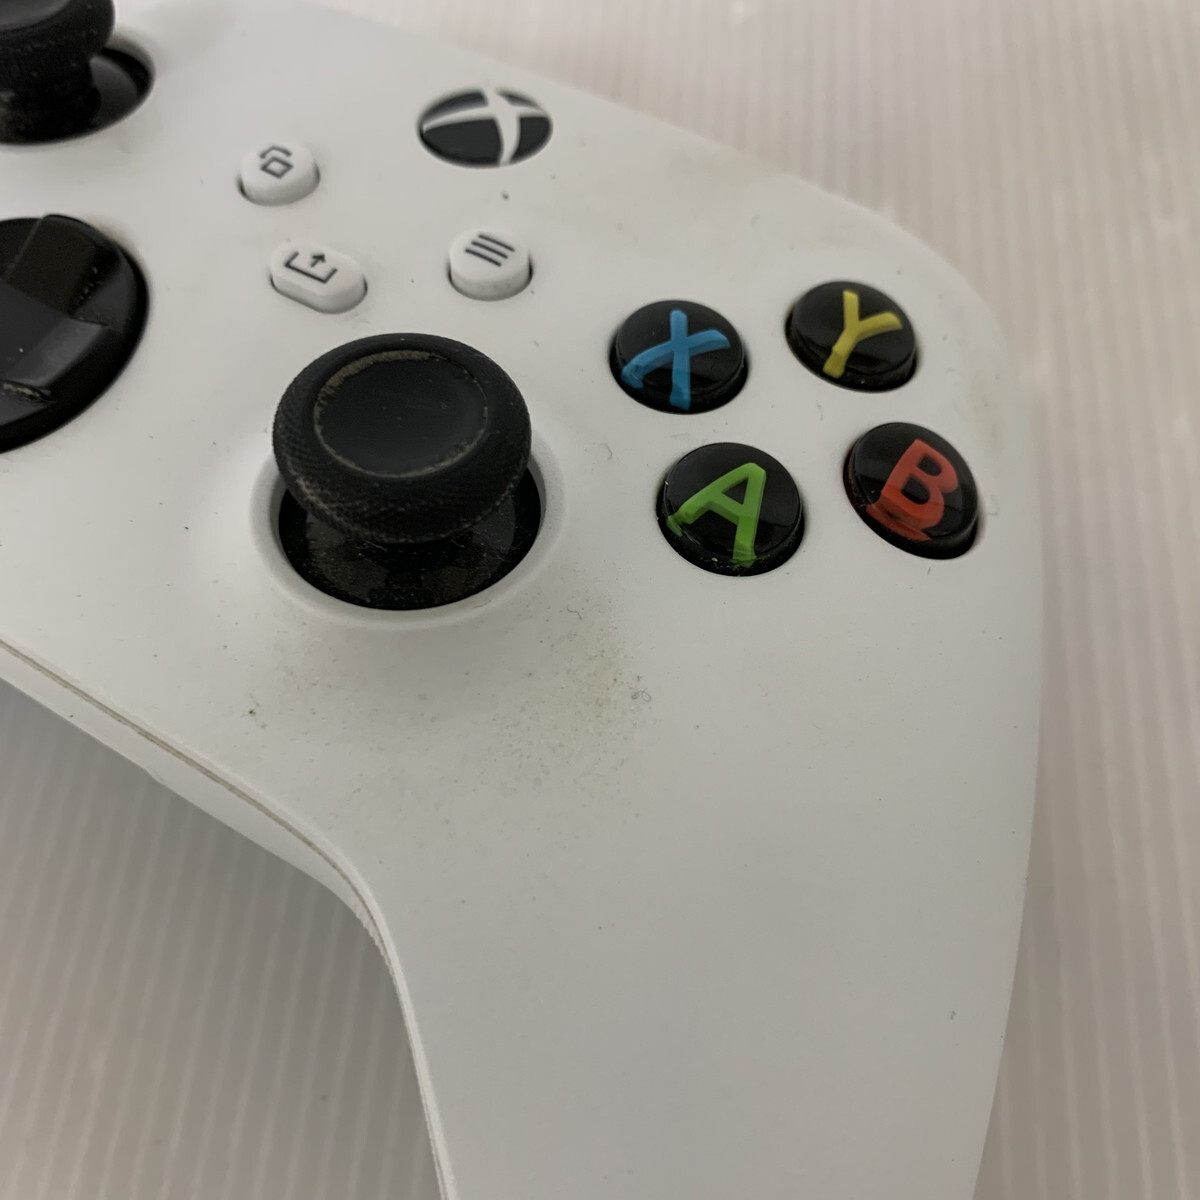 [ Junk ] Microsoft XBOX Series S body 512GB operation not yet verification used cigarettes smell have (M0405-10)